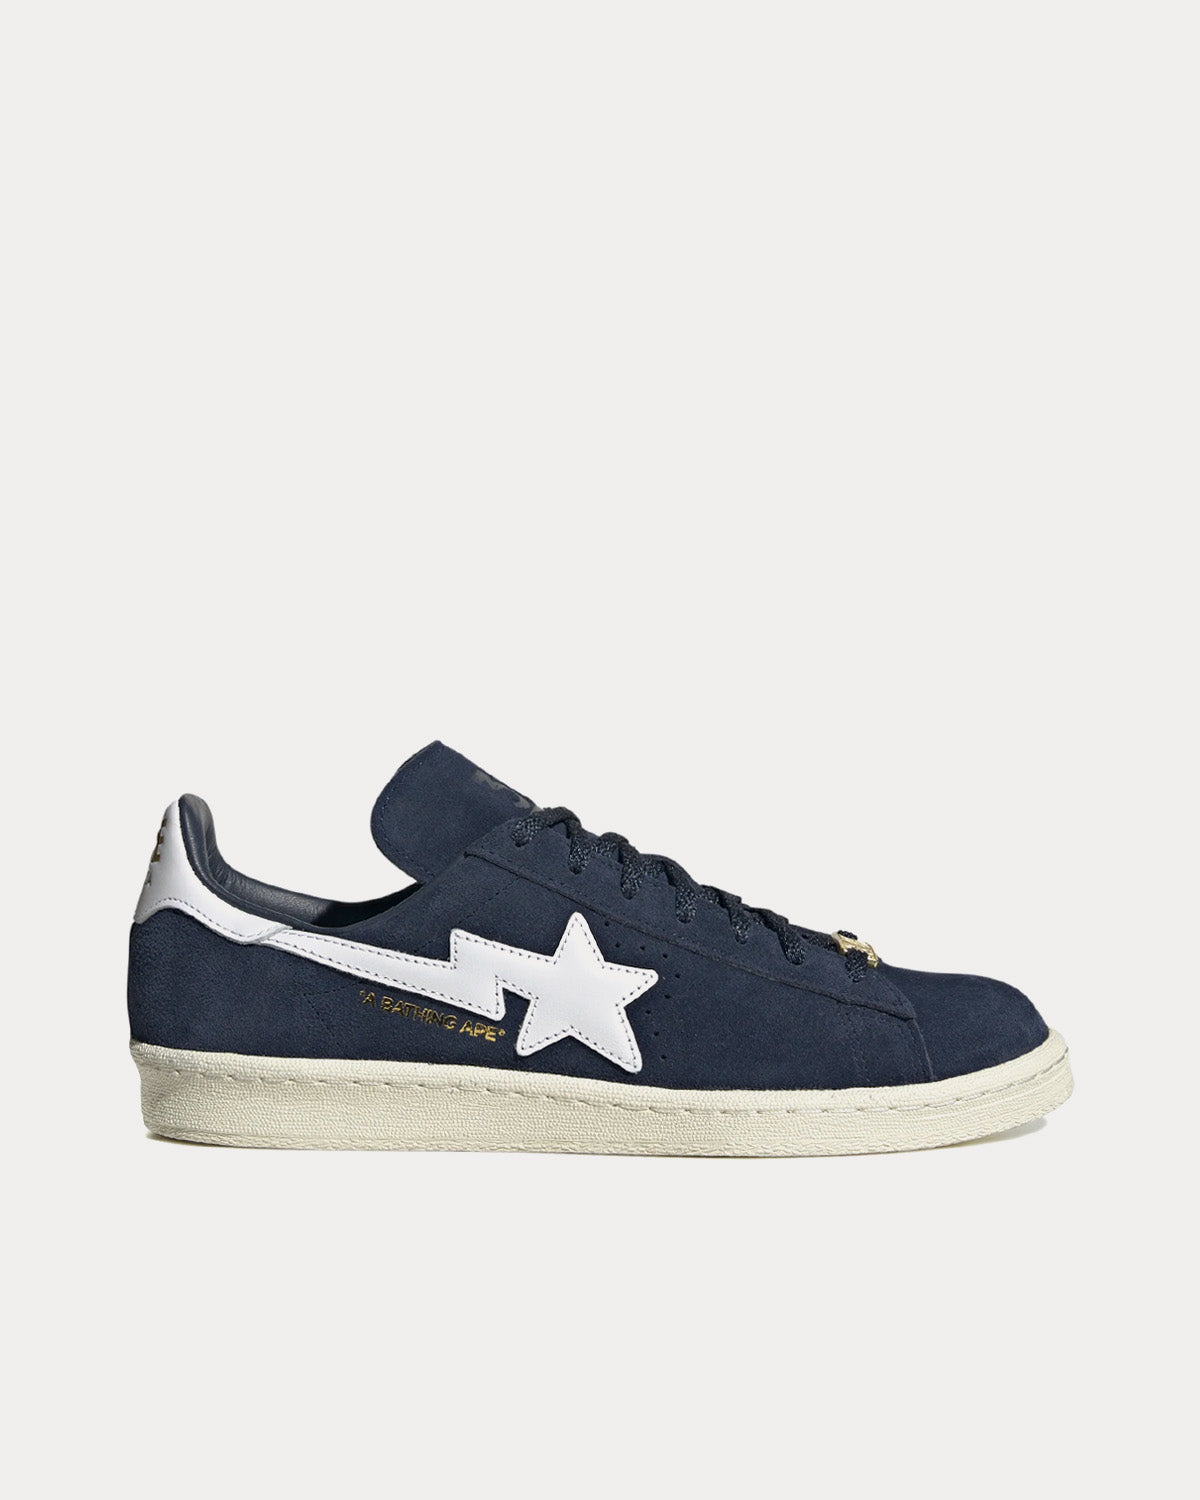 Campus 80s Collegiate Navy / Cloud White / Off-White Low Top Sneakers